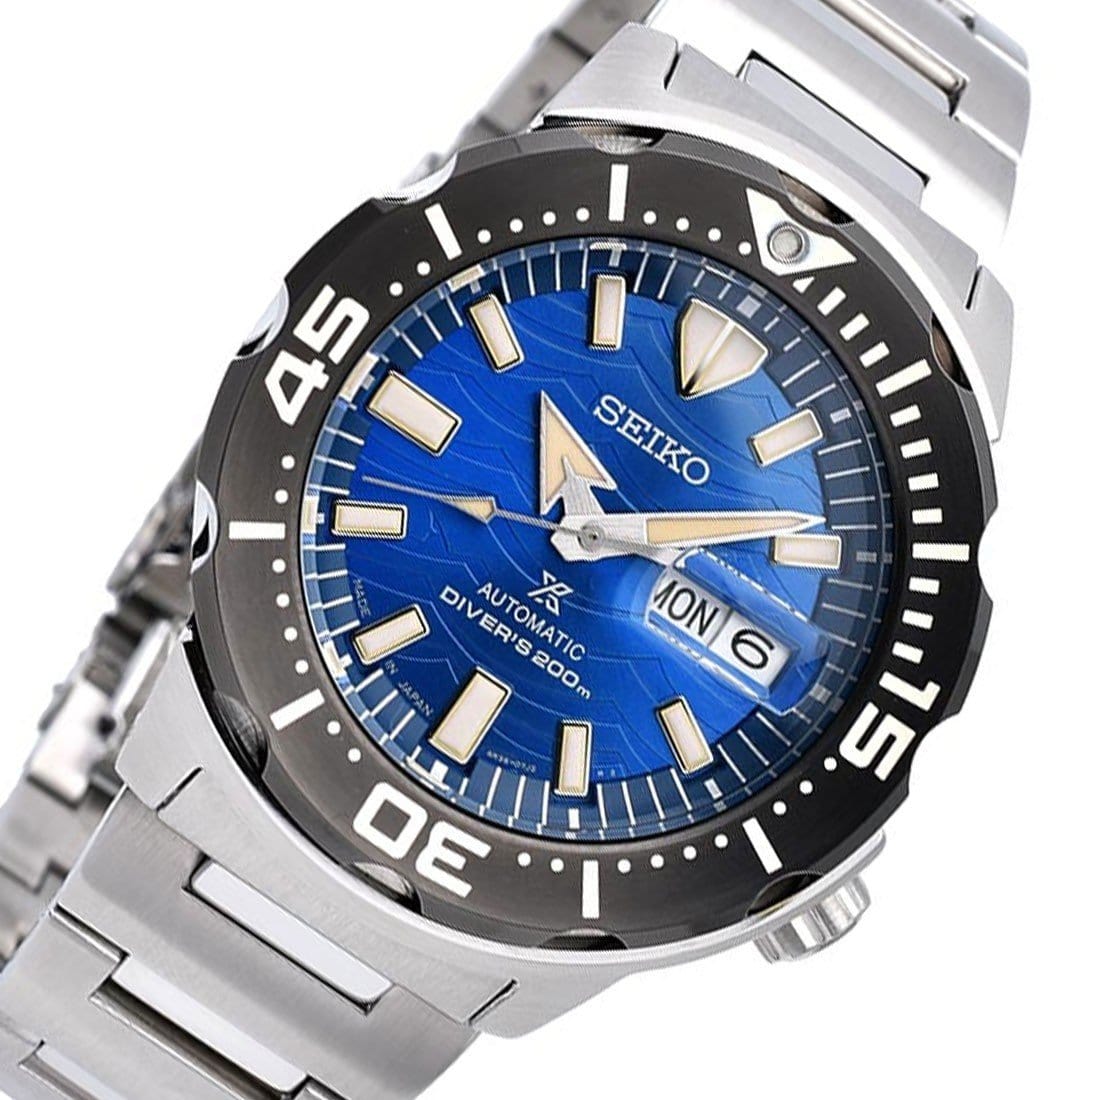 SBDY045 Seiko Monster Prospex Automatic 200M Blue Dial Mens Dive Watch